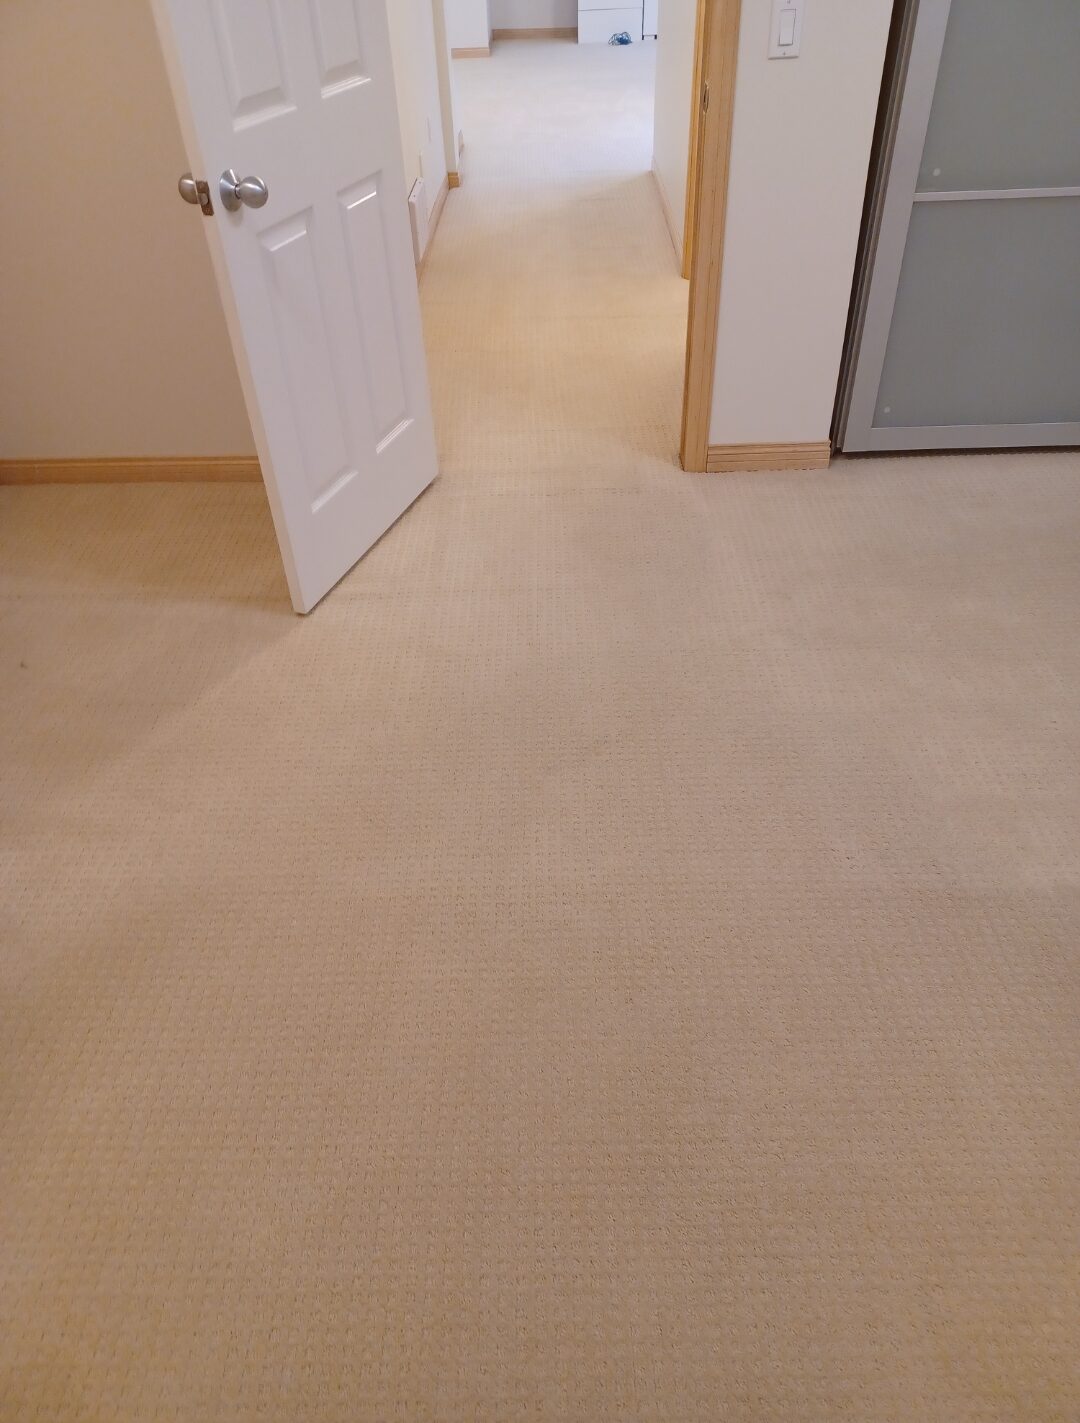 carpet that has been repaired